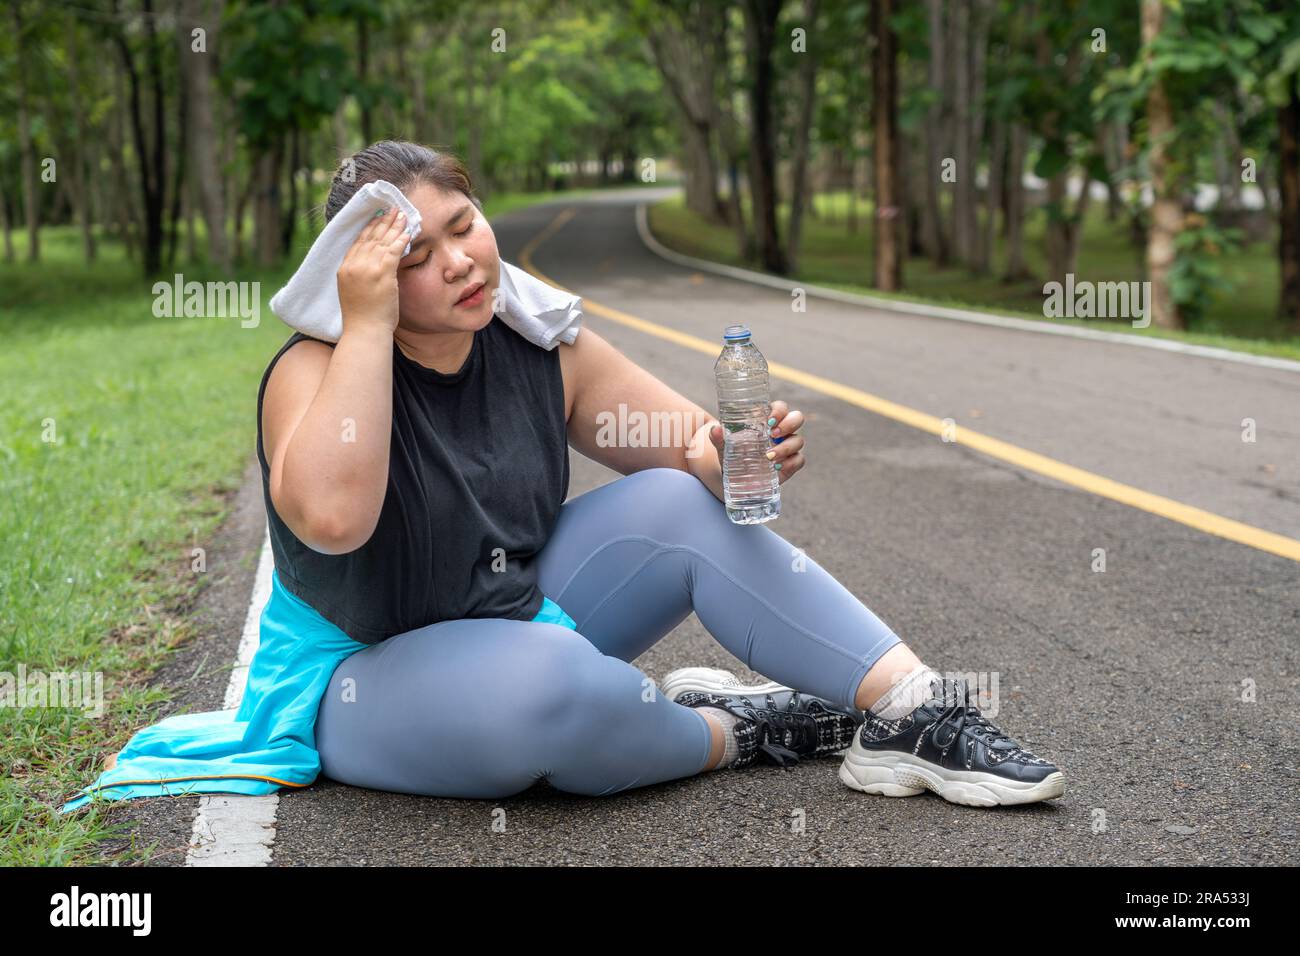 An overweight young woman wipping off her sweat from her forehead while holding water bottle and sitting down on the running track of a local park aft Stock Photo